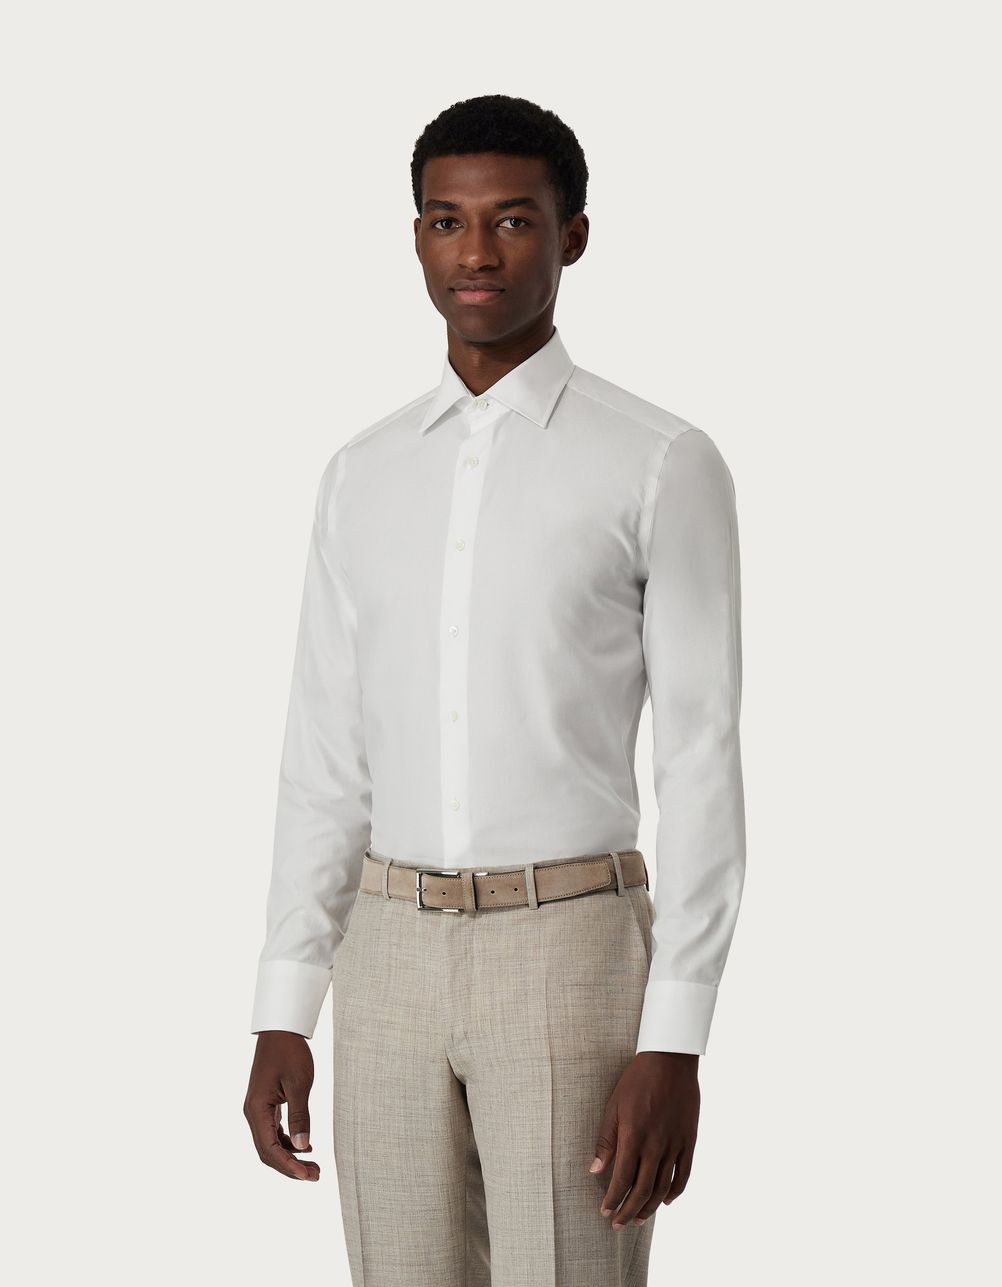 Slim-fit shirt in white Impeccable cotton with a very fine weave